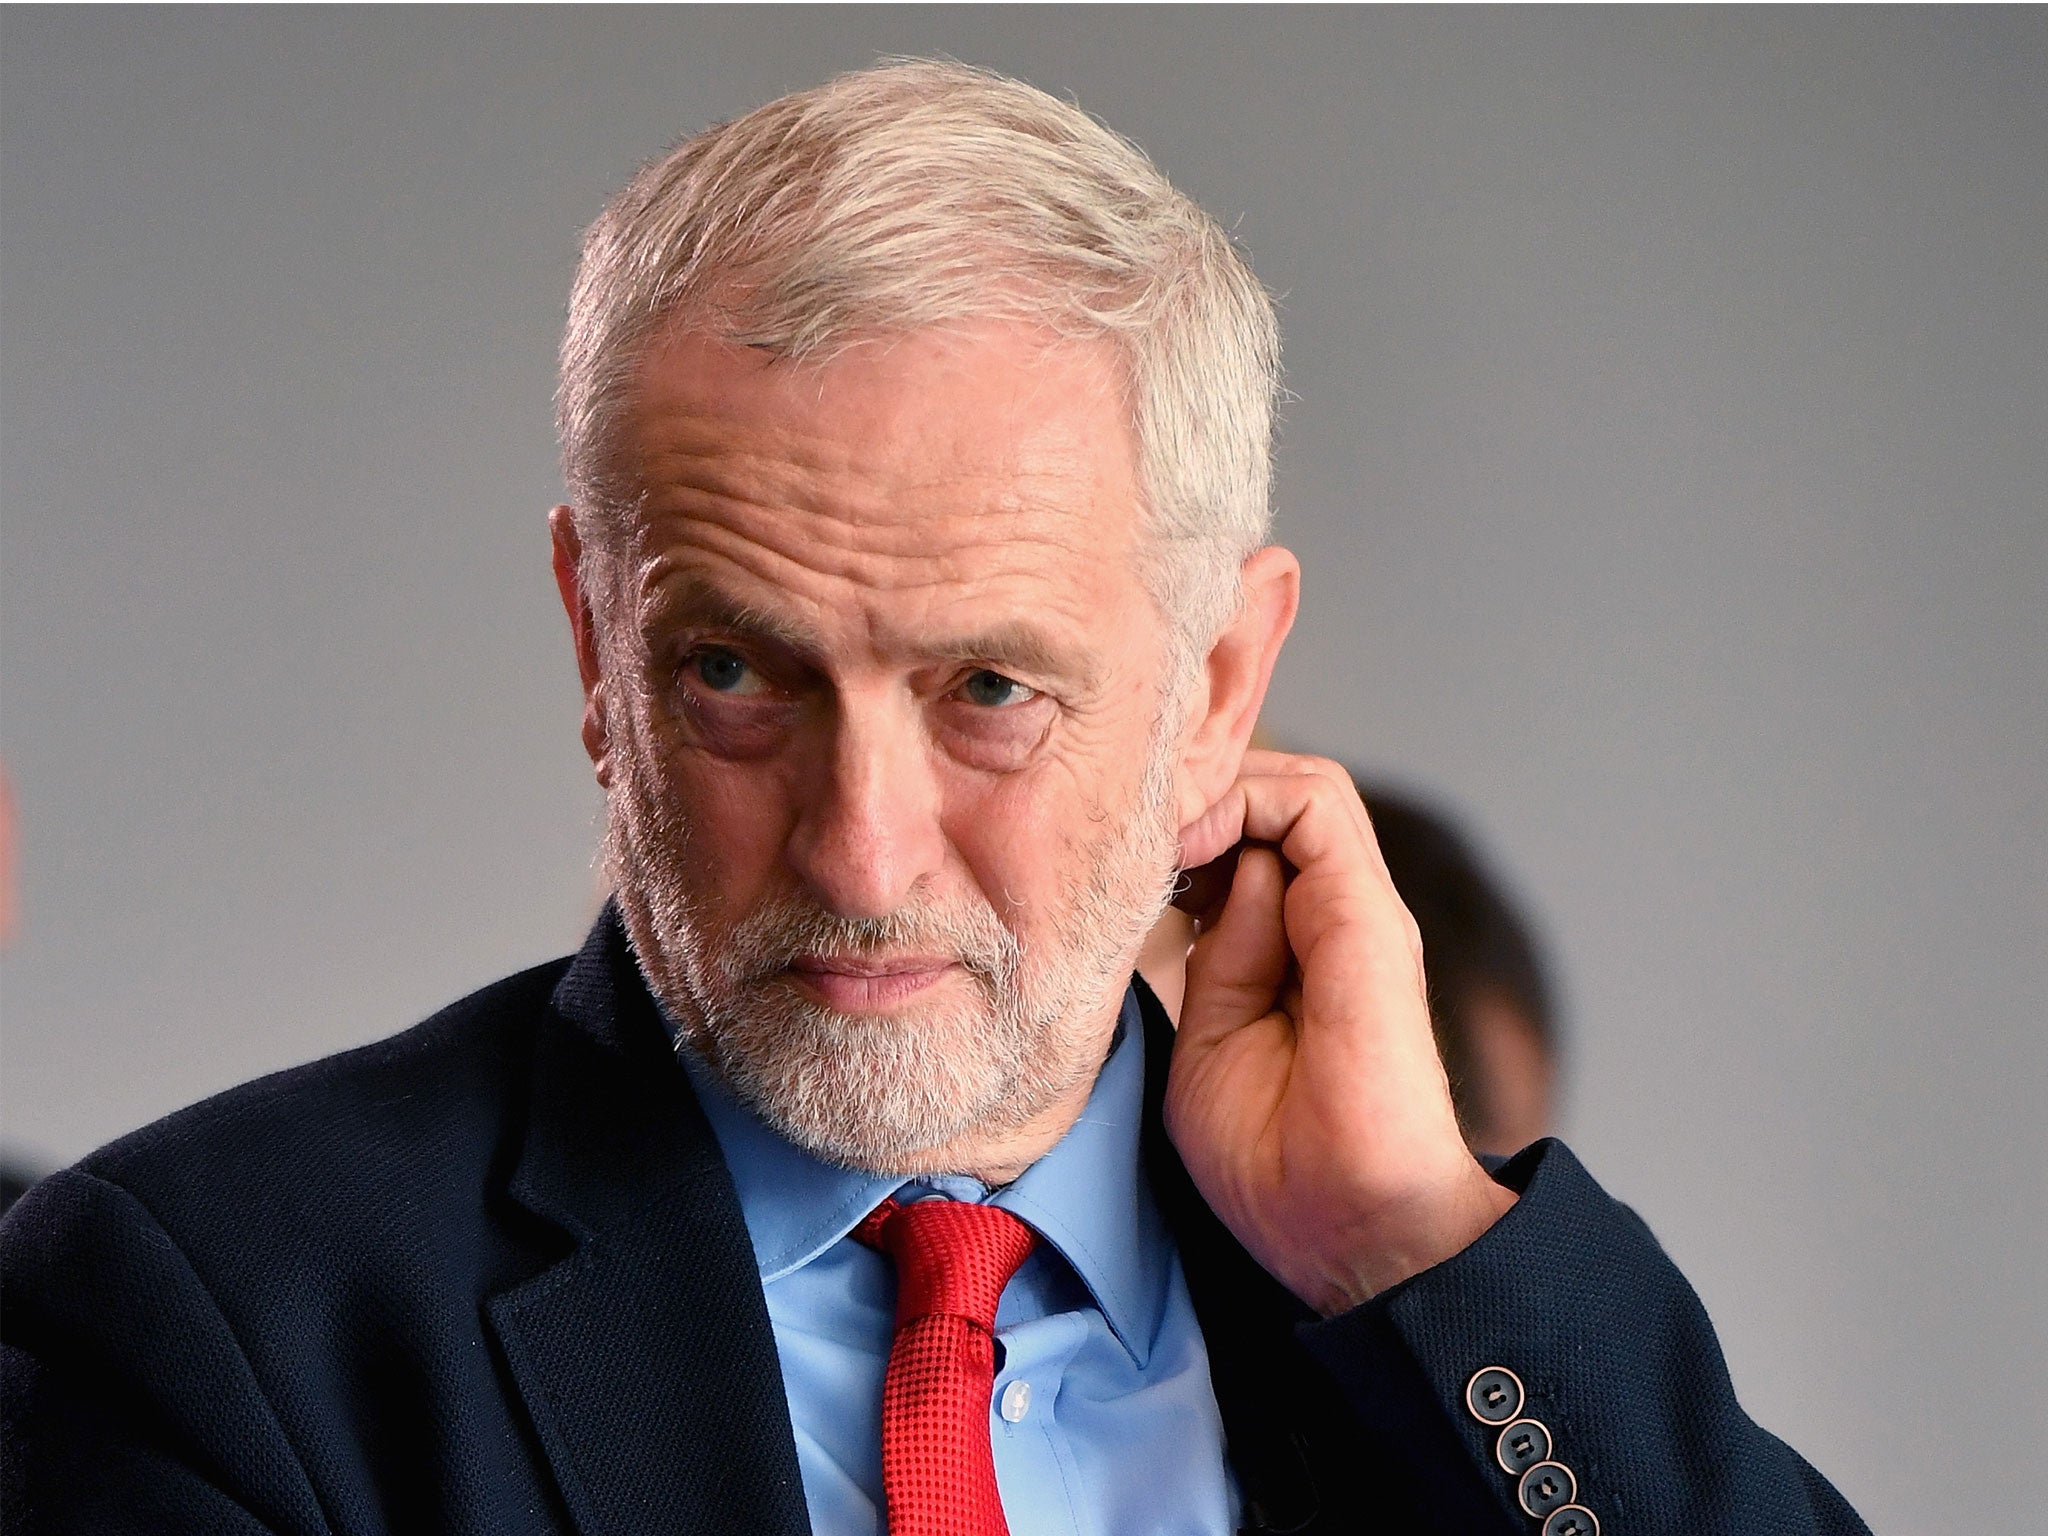 Jeremy Corbyn has repeatedly refused to resign